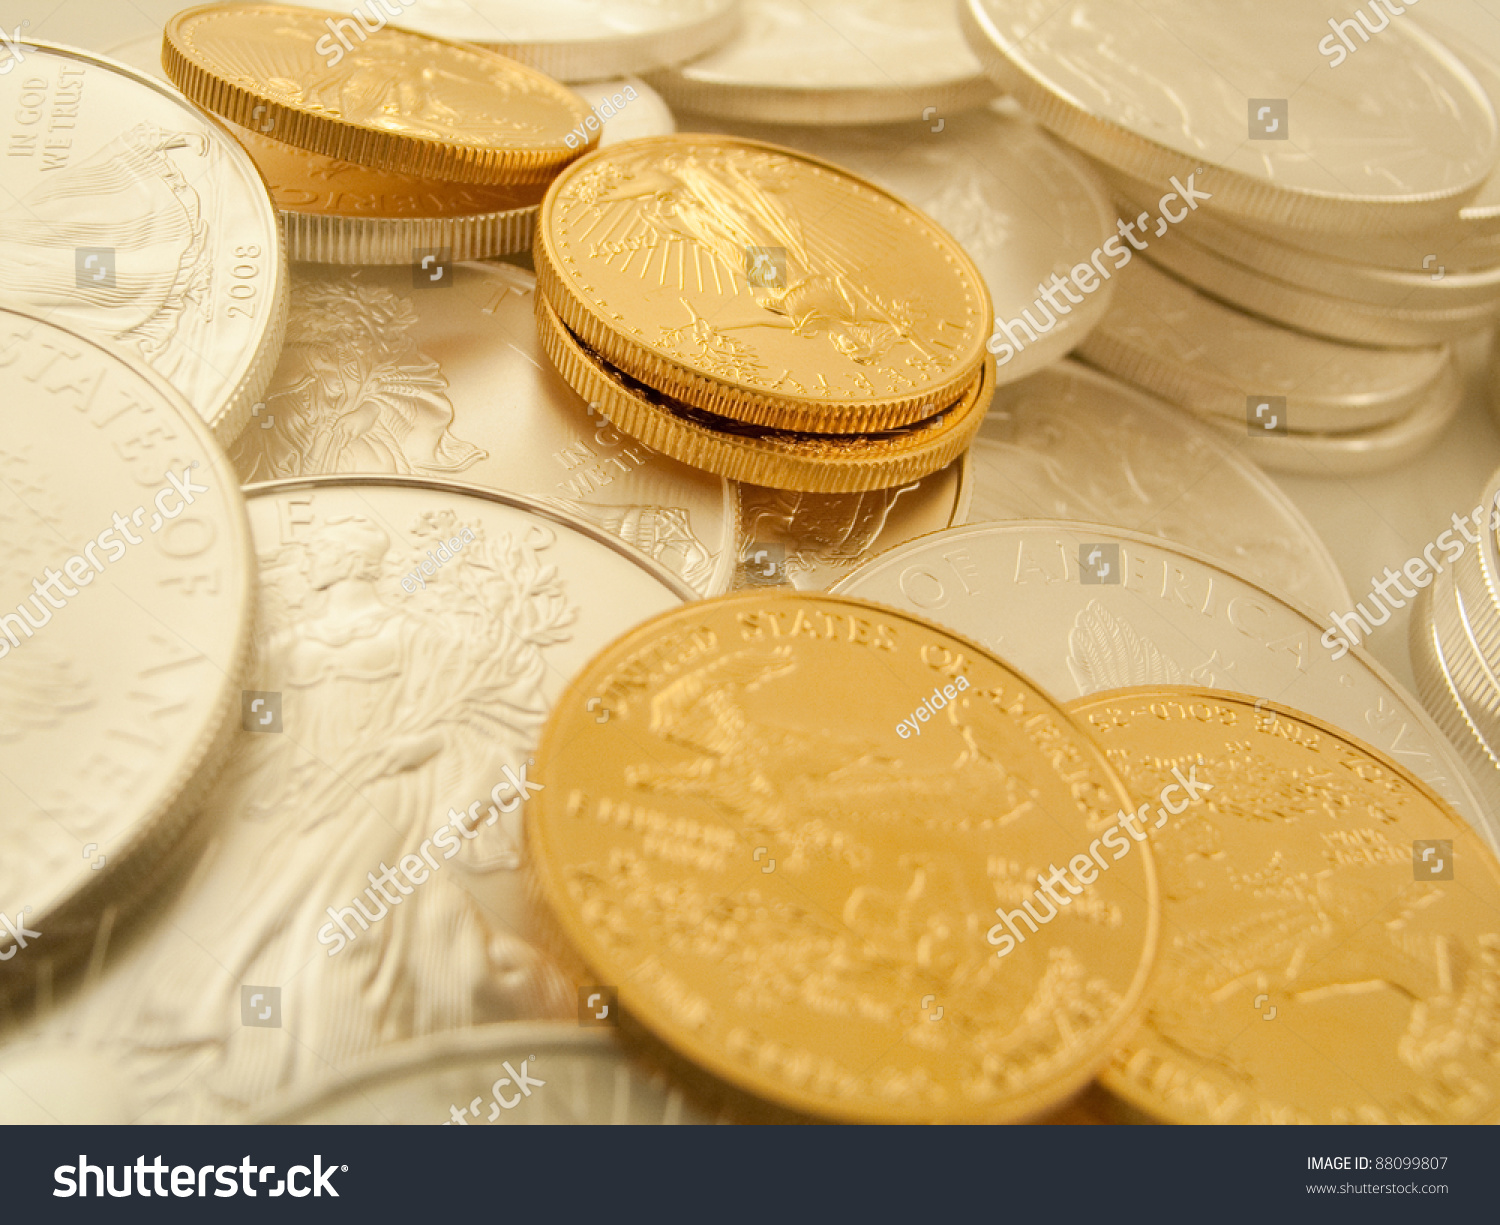 Gold and Silver U.S. Bullion Coins #88099807